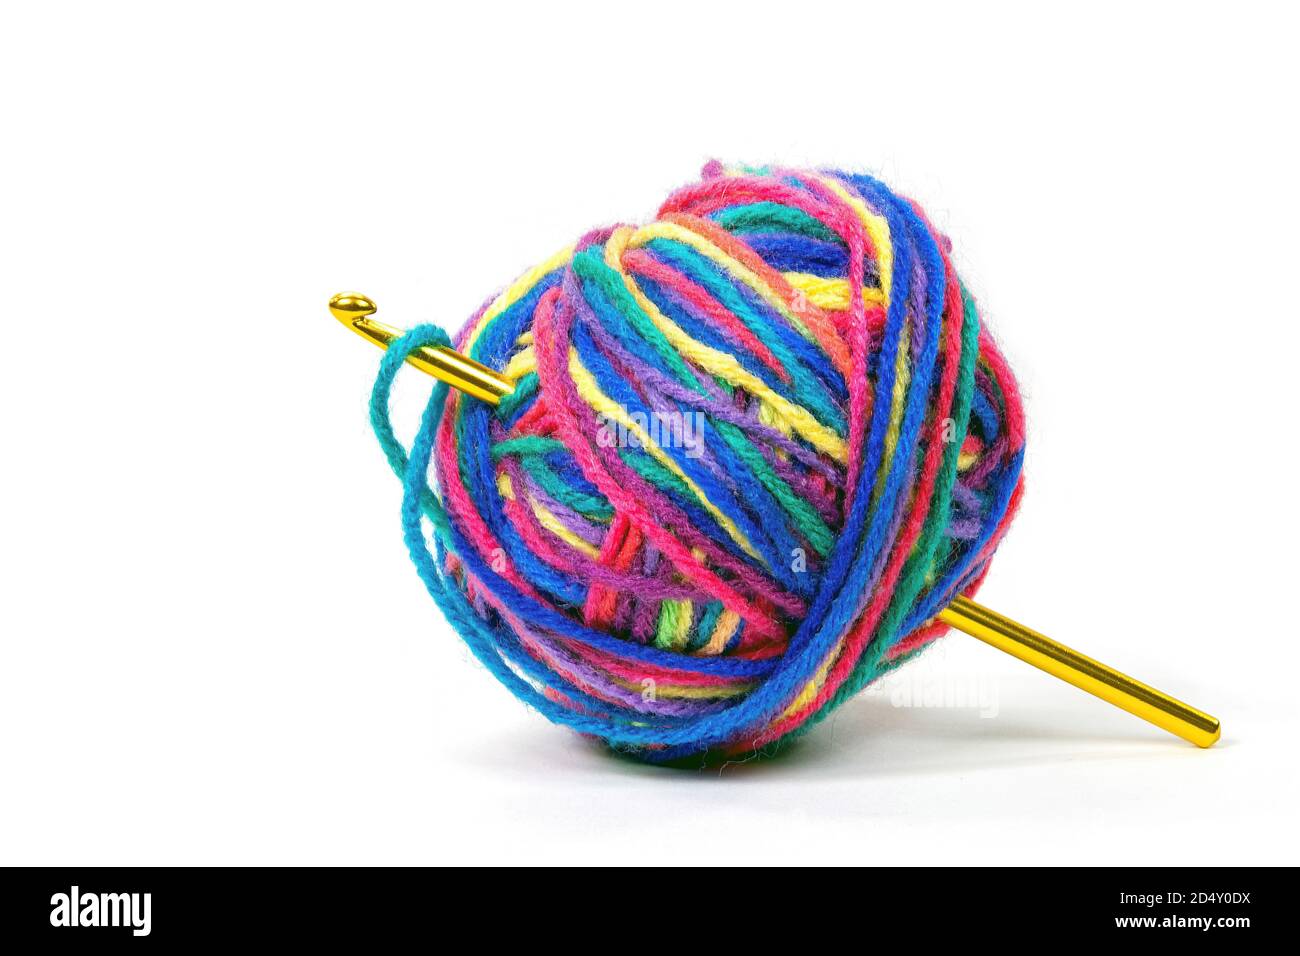 crochet hook in colorful ball of yarn isolated on white background Stock Photo